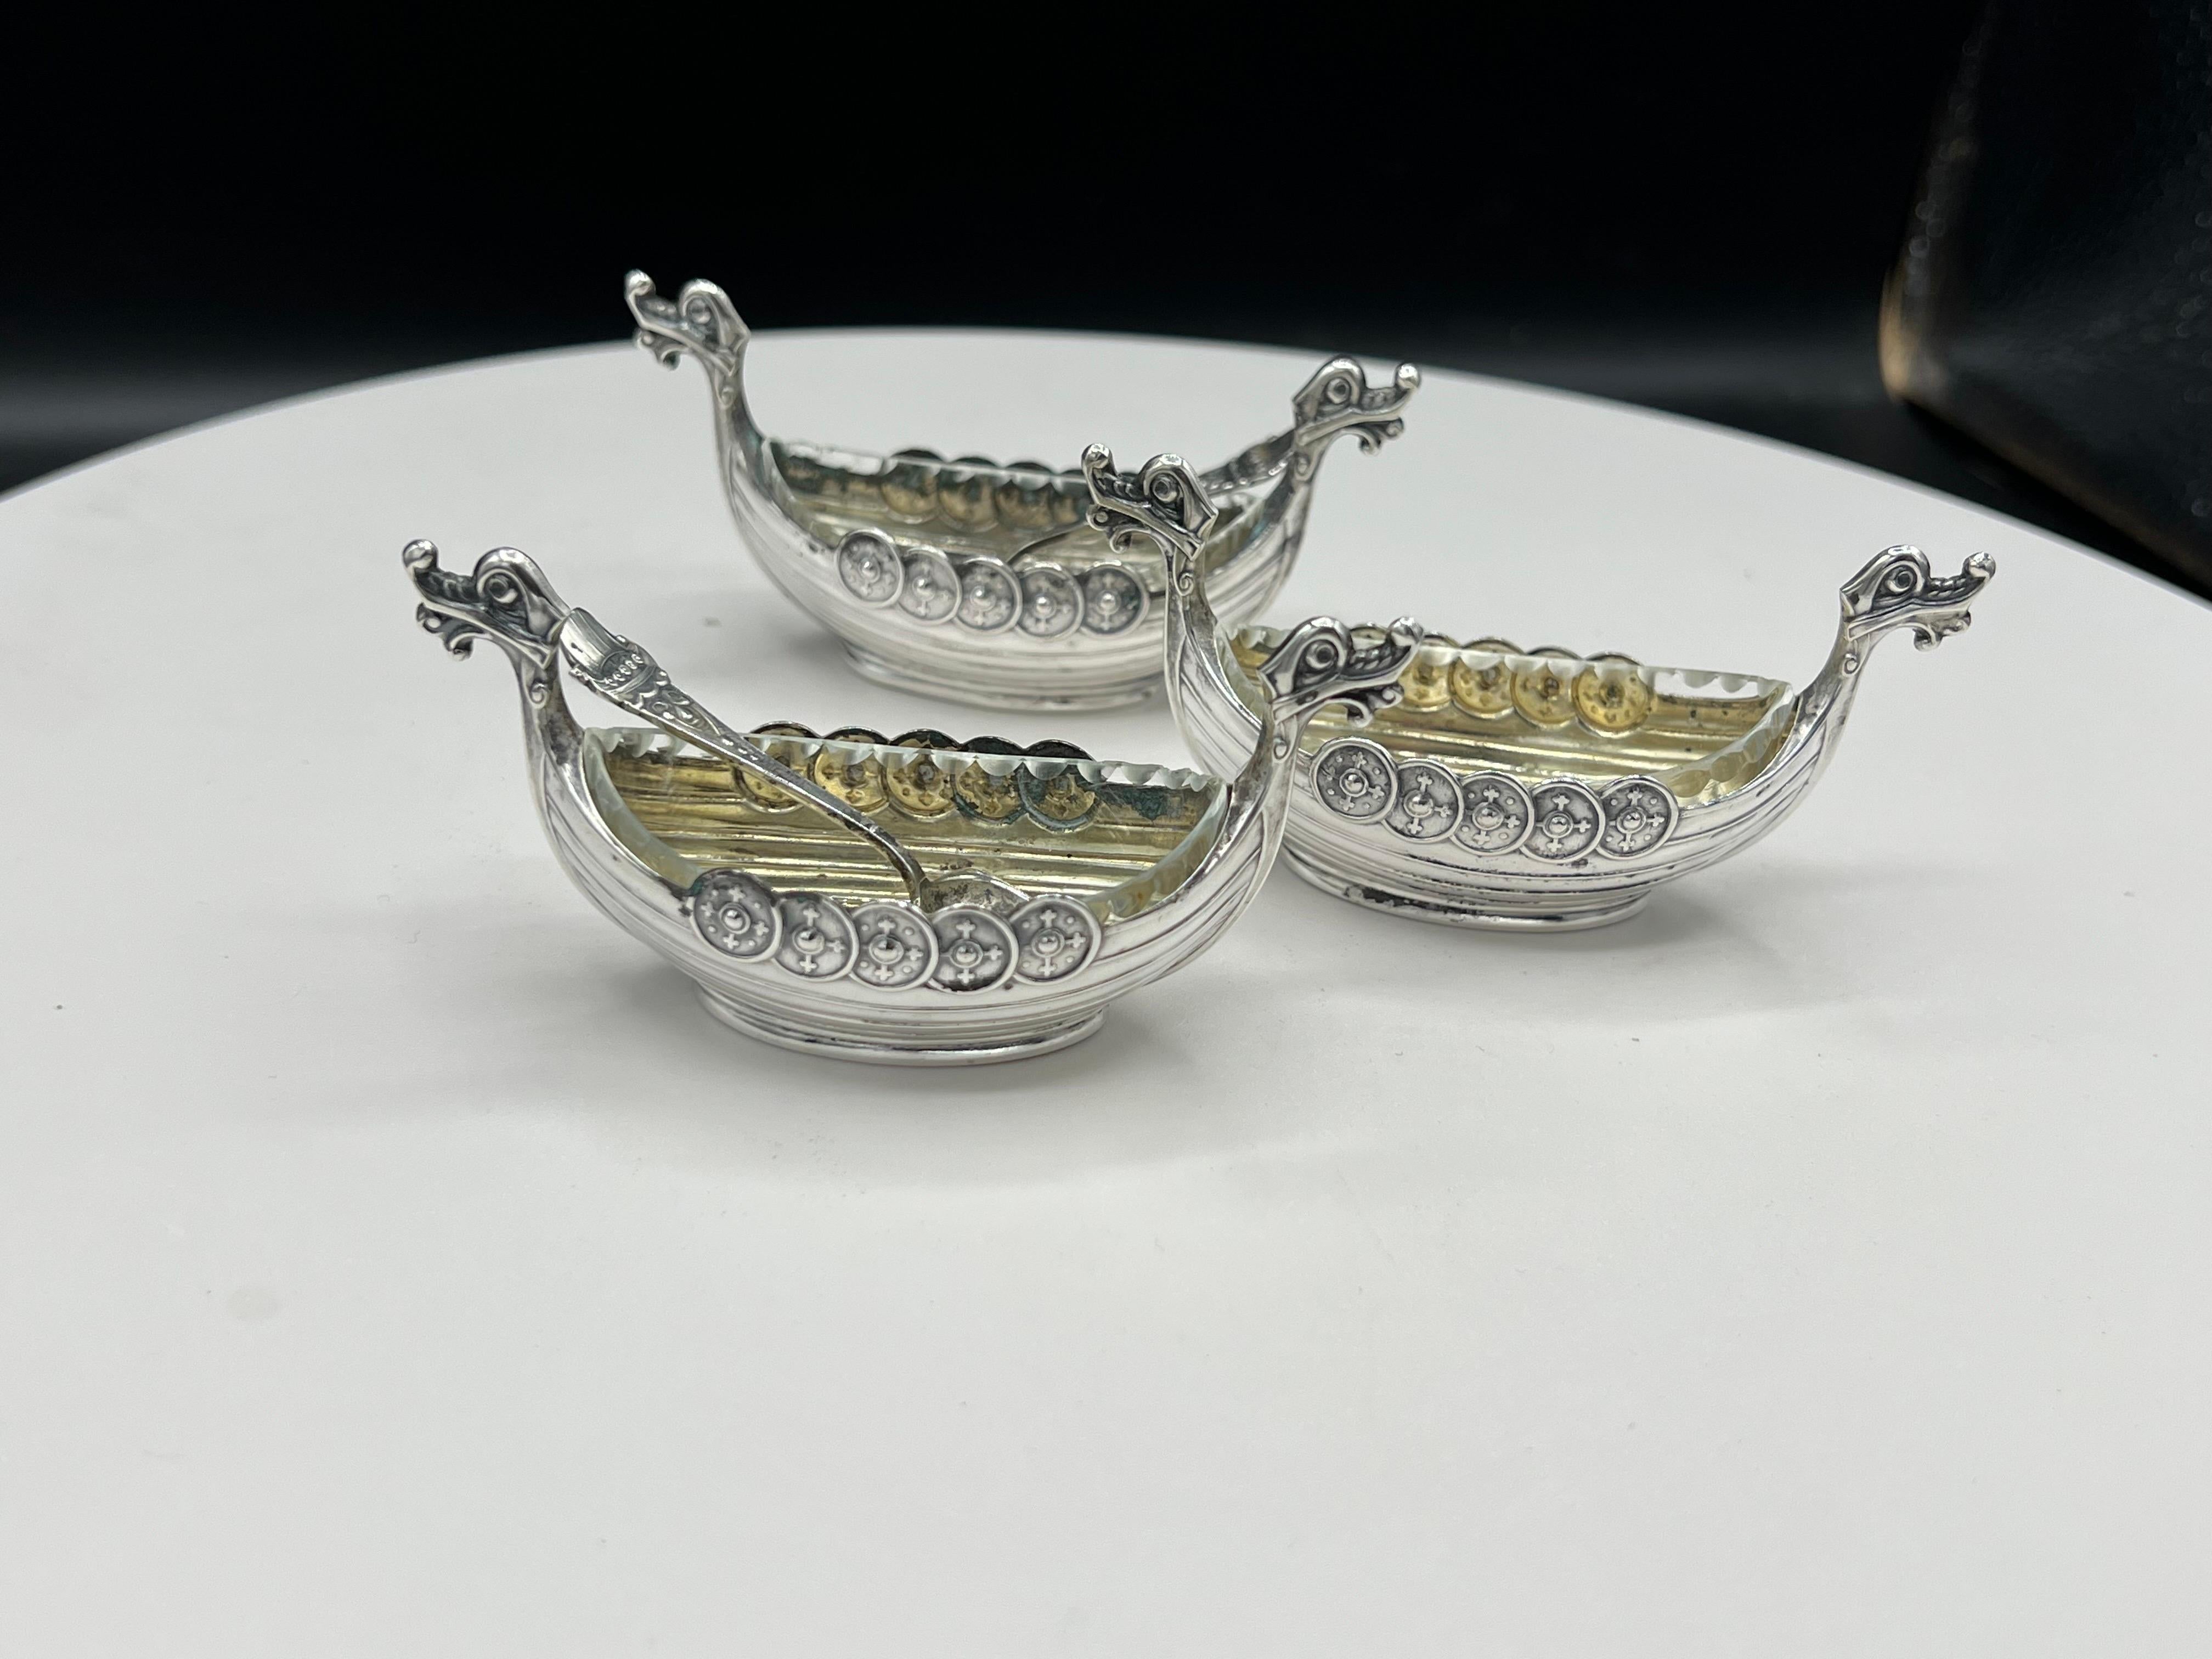 A Set of 3 Viking ship silver salts with 2 spoons 
3 glass inserts.